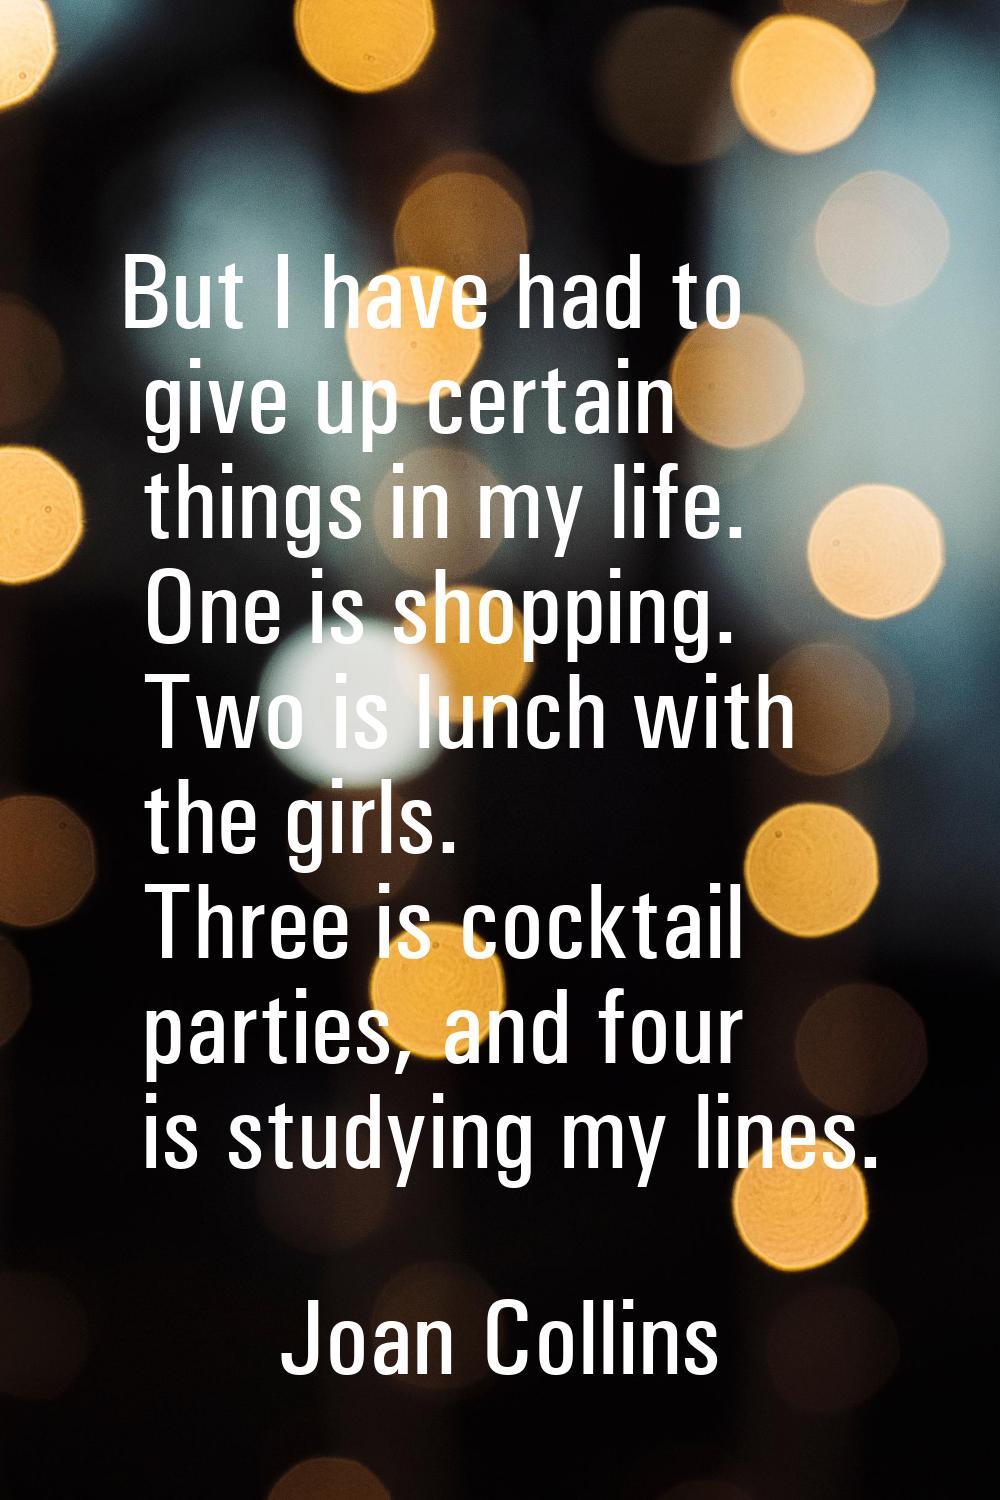 But I have had to give up certain things in my life. One is shopping. Two is lunch with the girls. 